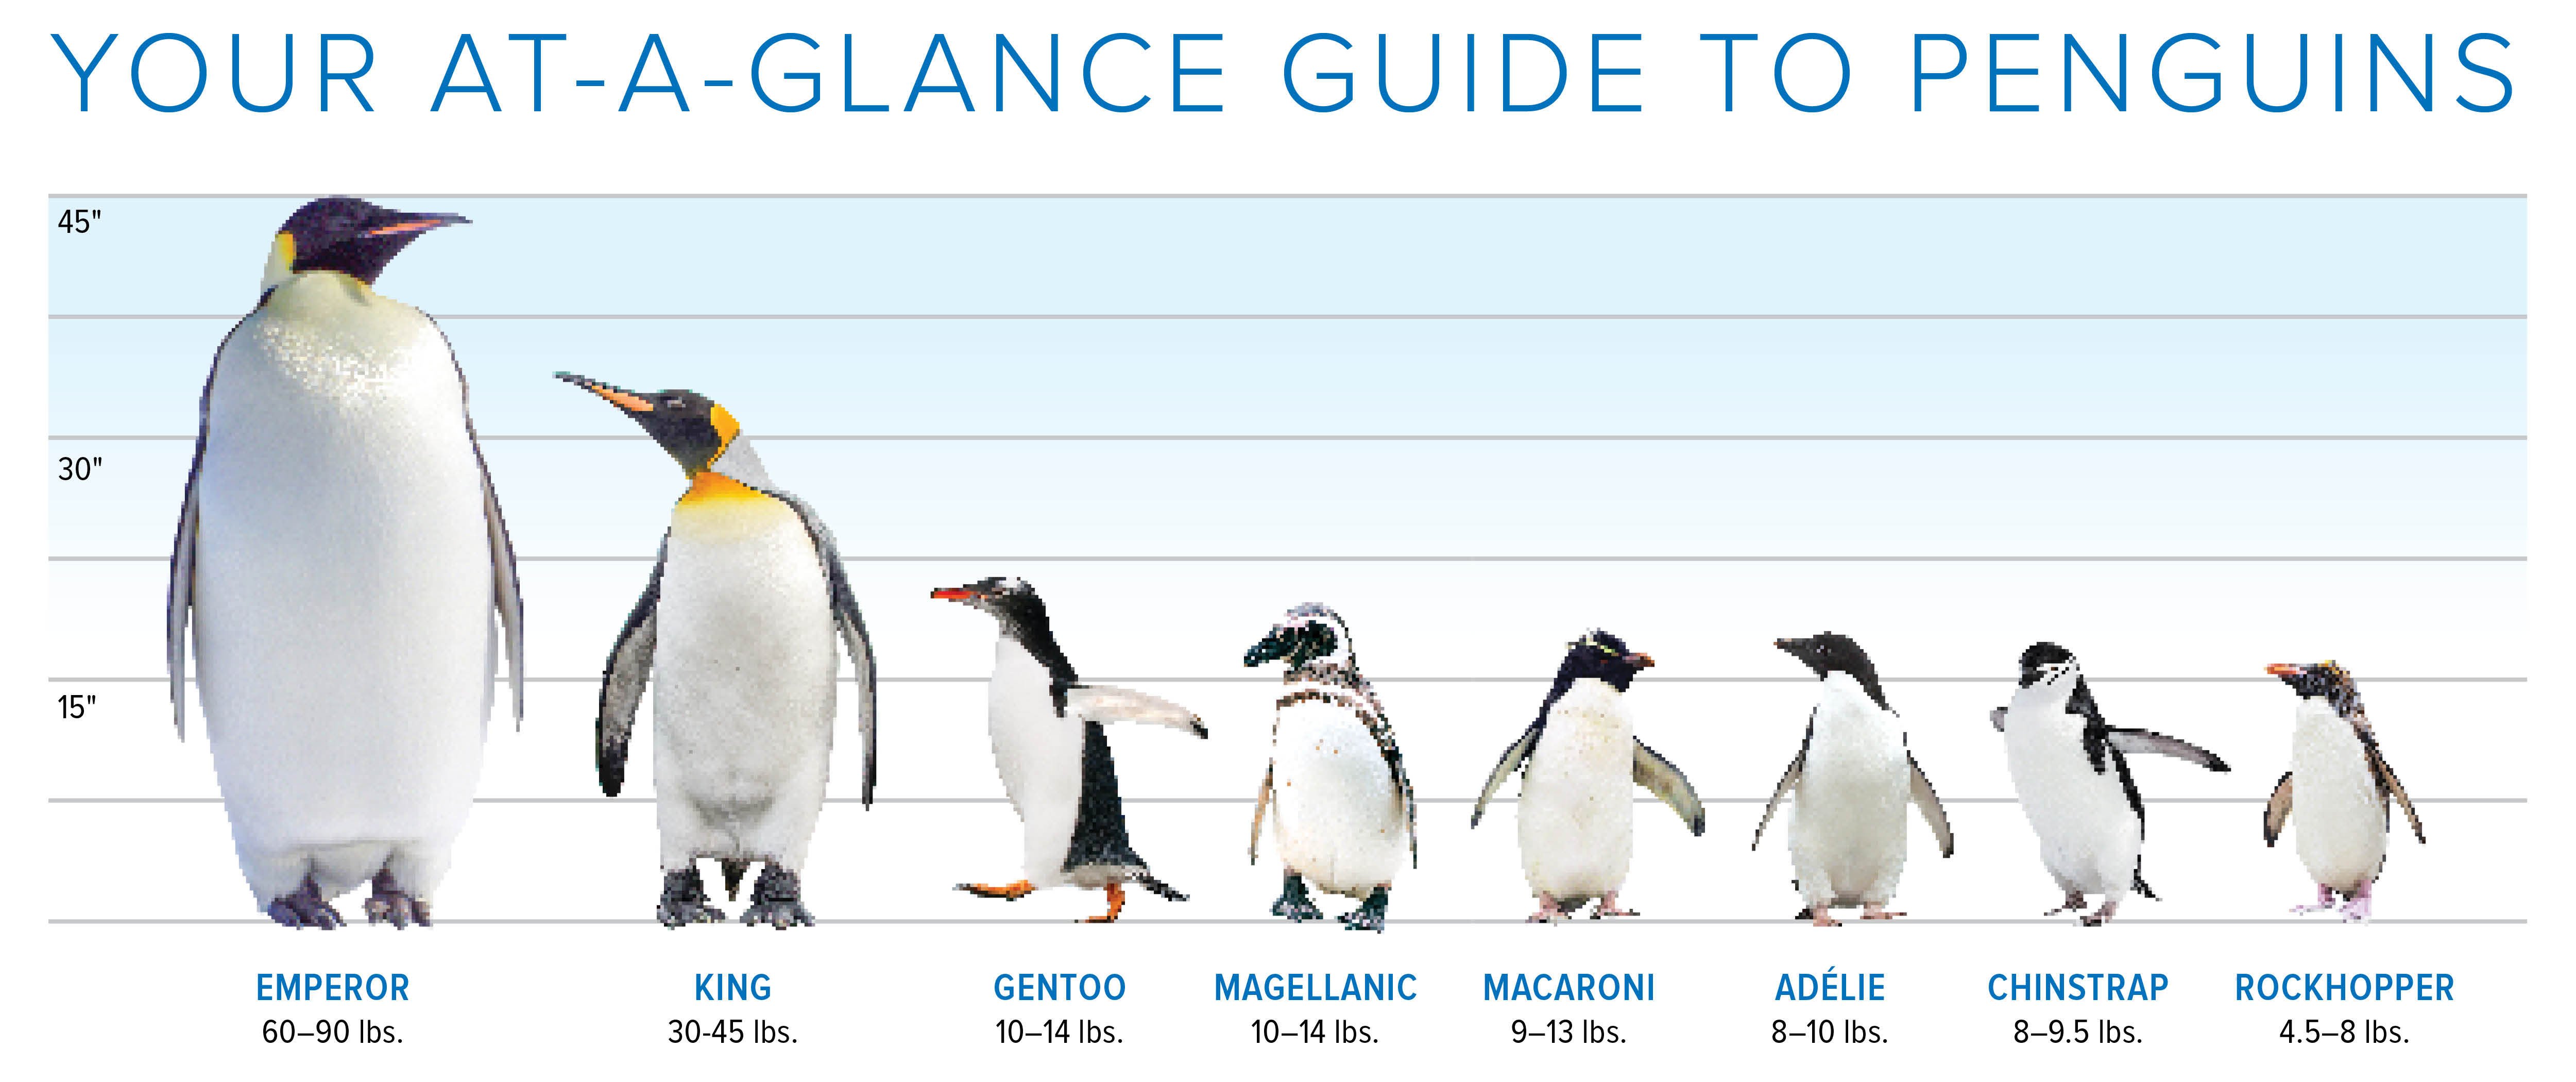 At a glance penguin chart.jpg